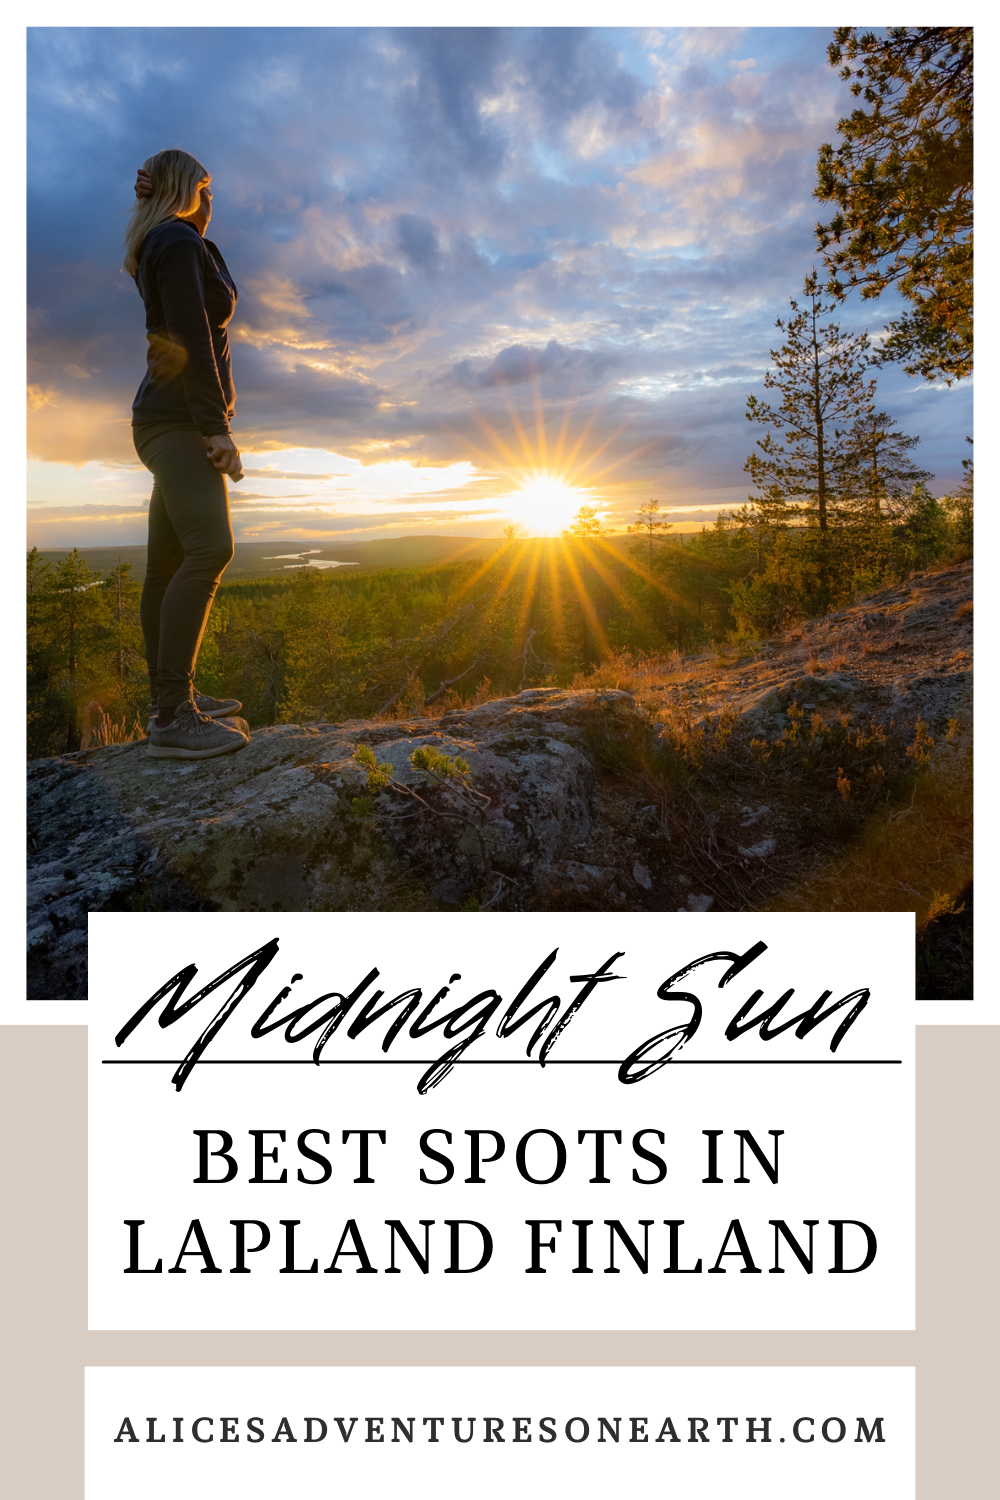 Best places to visit in Lapland Finland to experience the Midnight Sun #finalnd #midnightsun